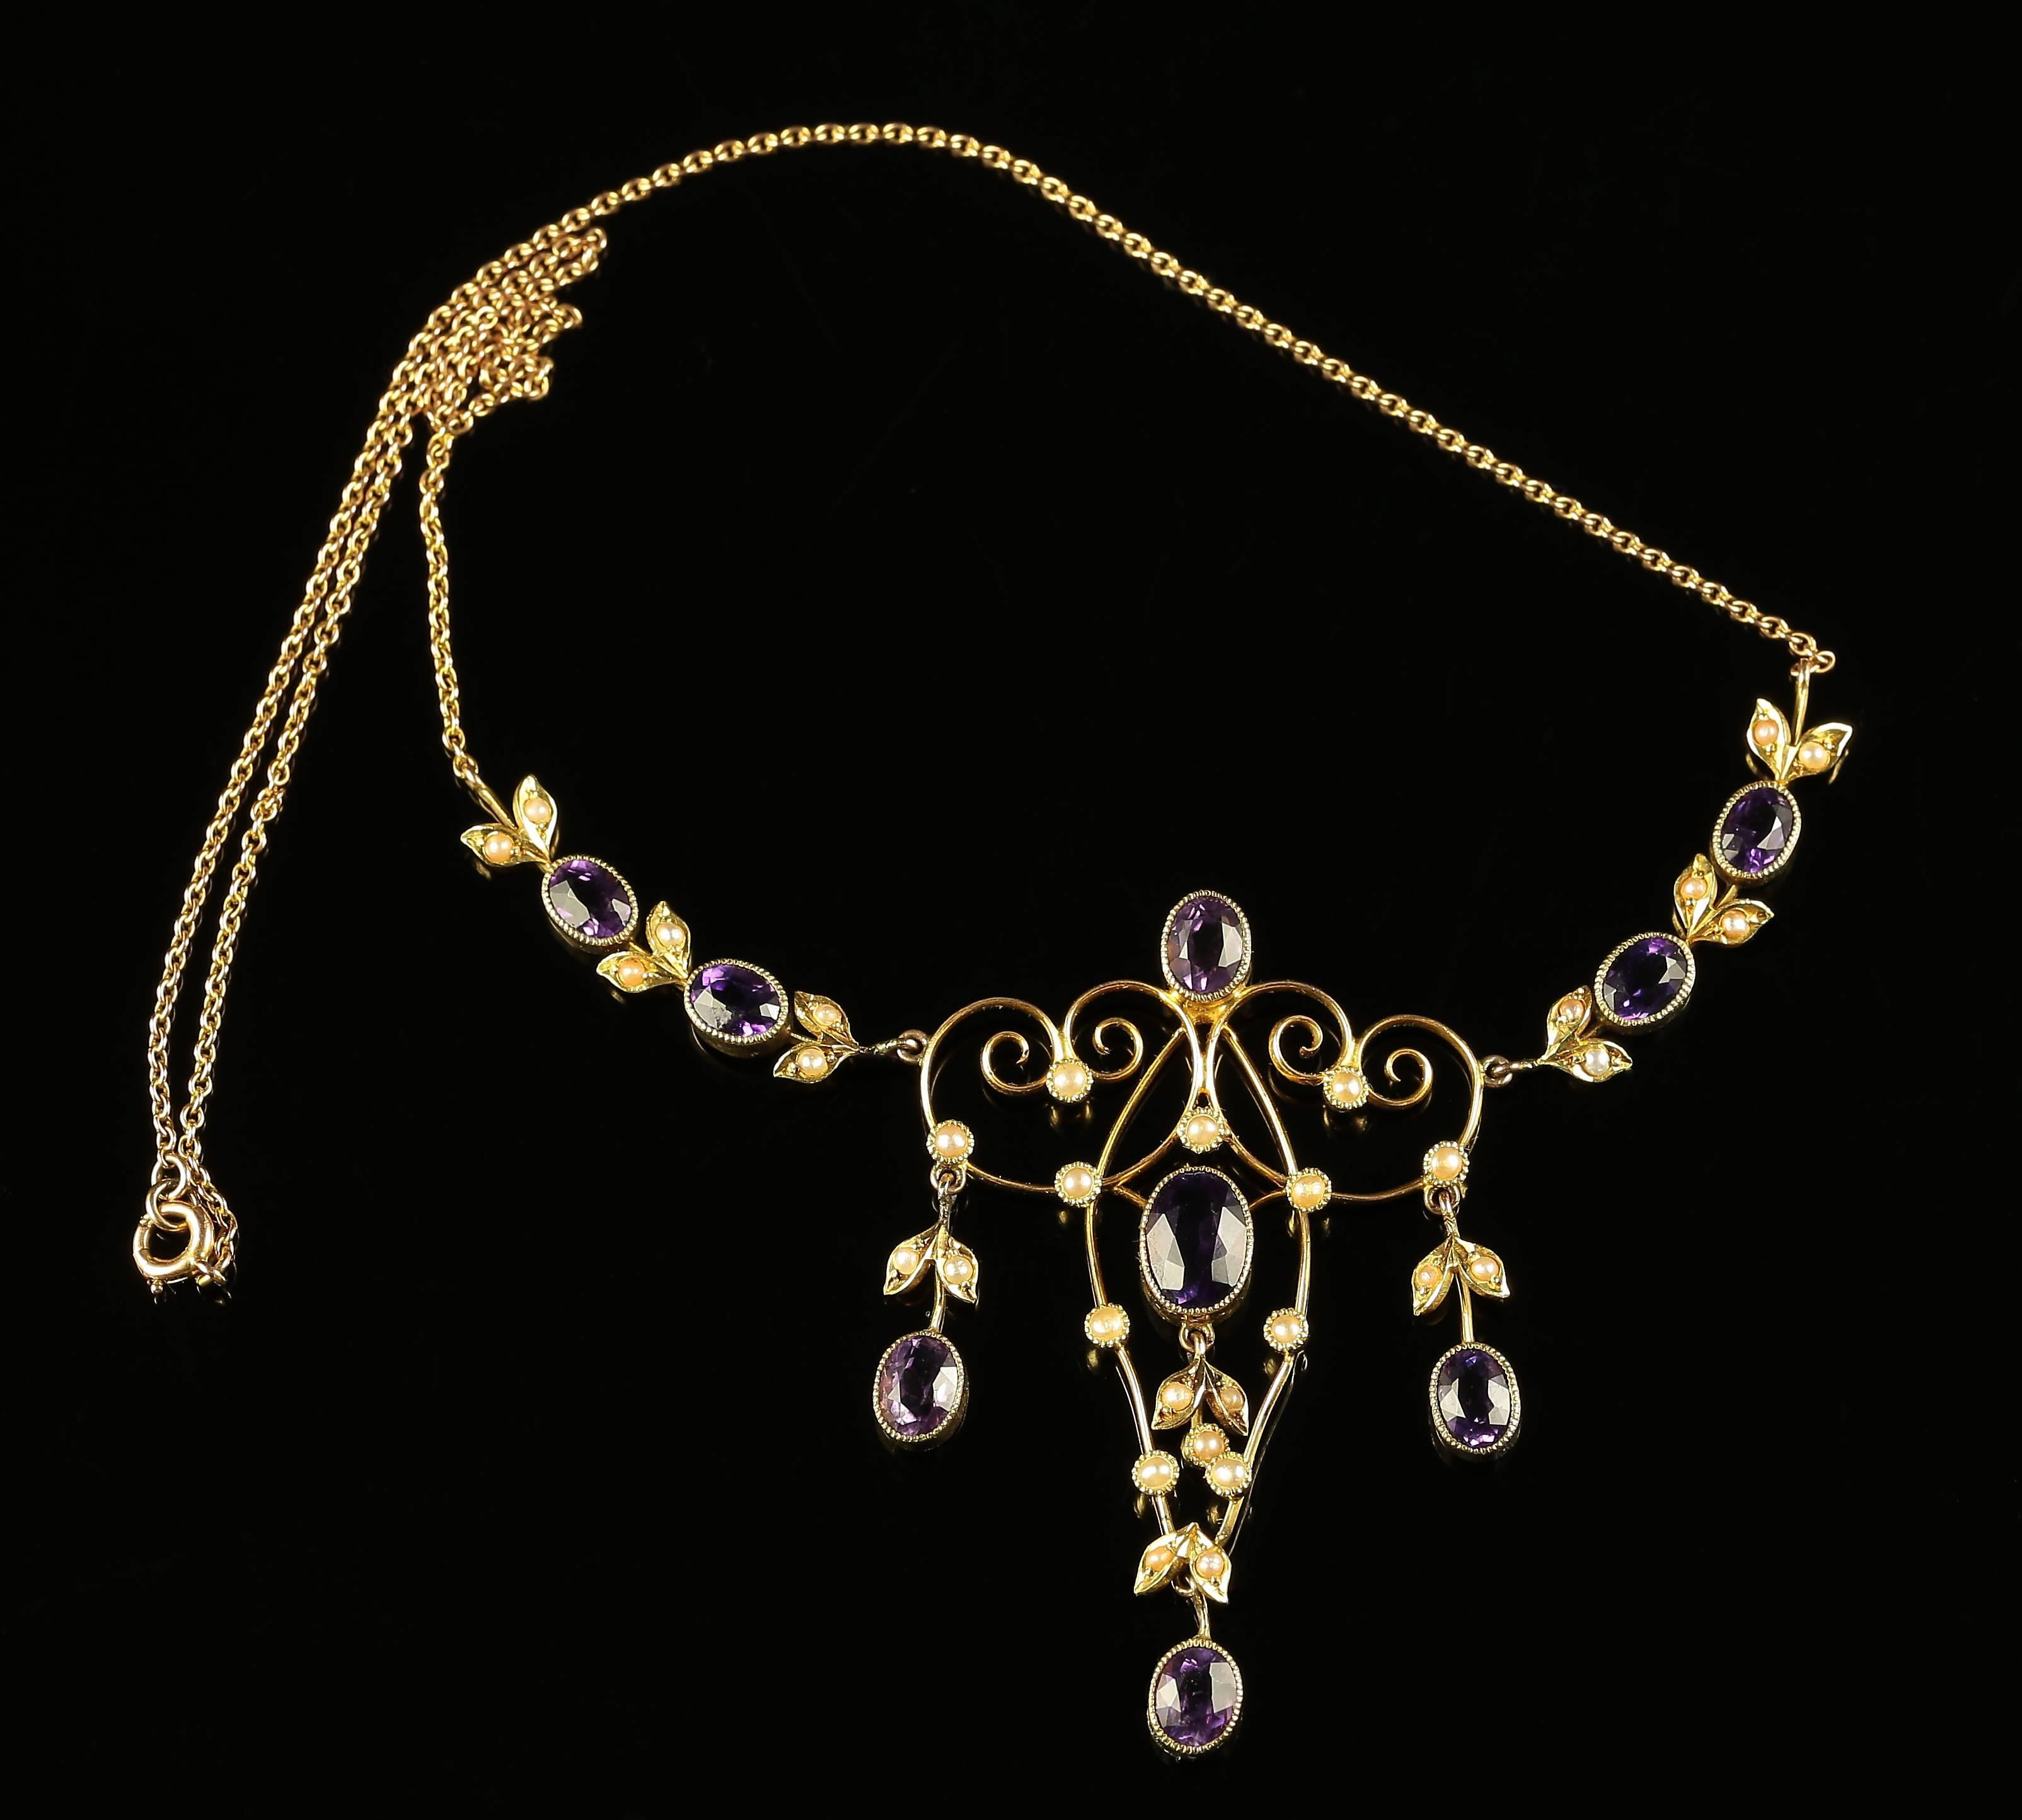 Antique Edwardian Amethyst Pearl Gold Garland Necklace  1